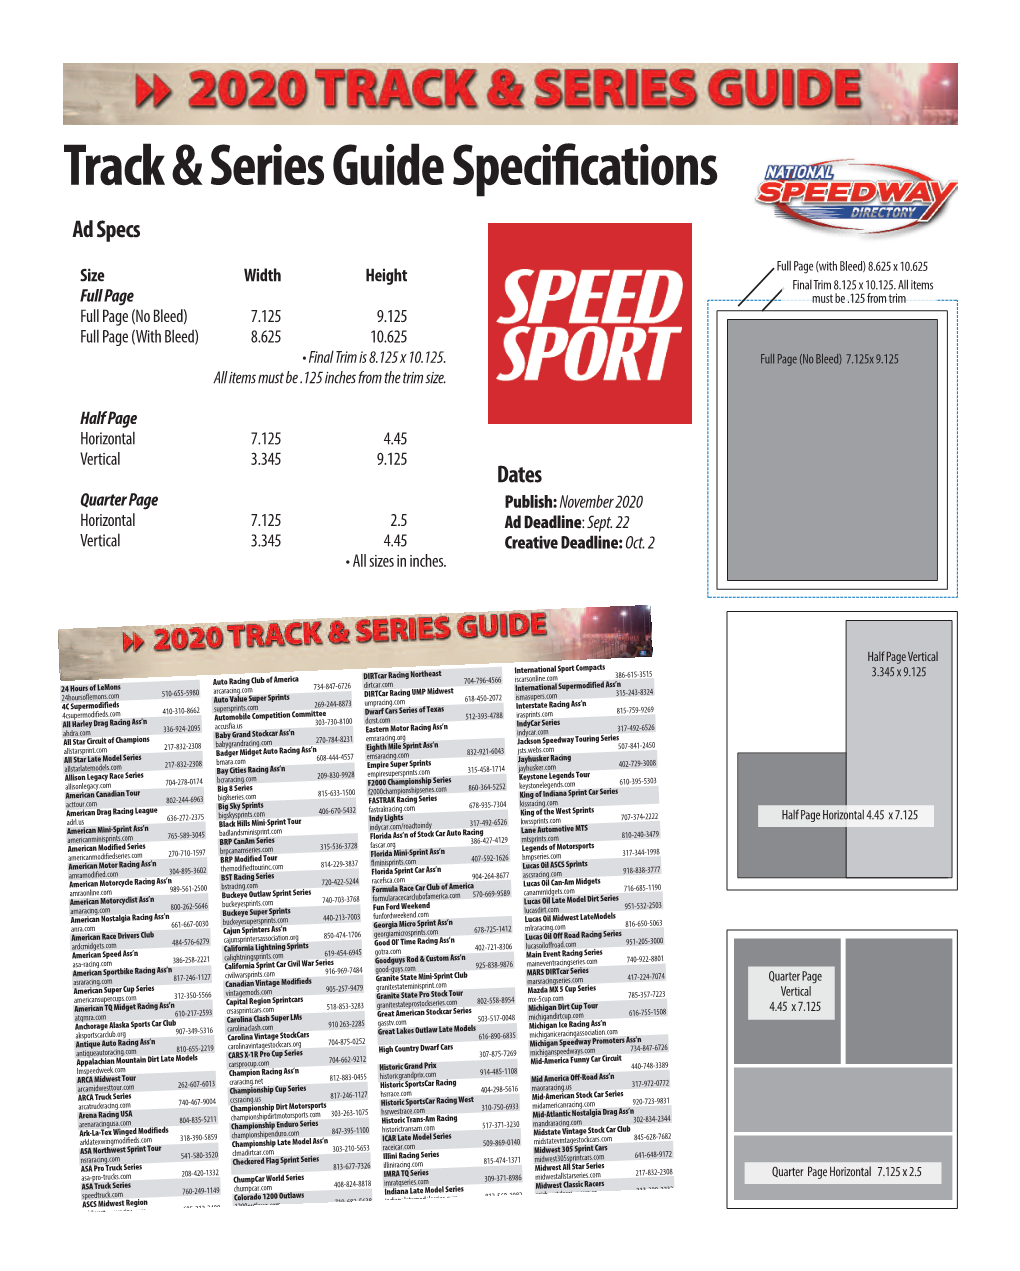 Track & Series Guide Specifications